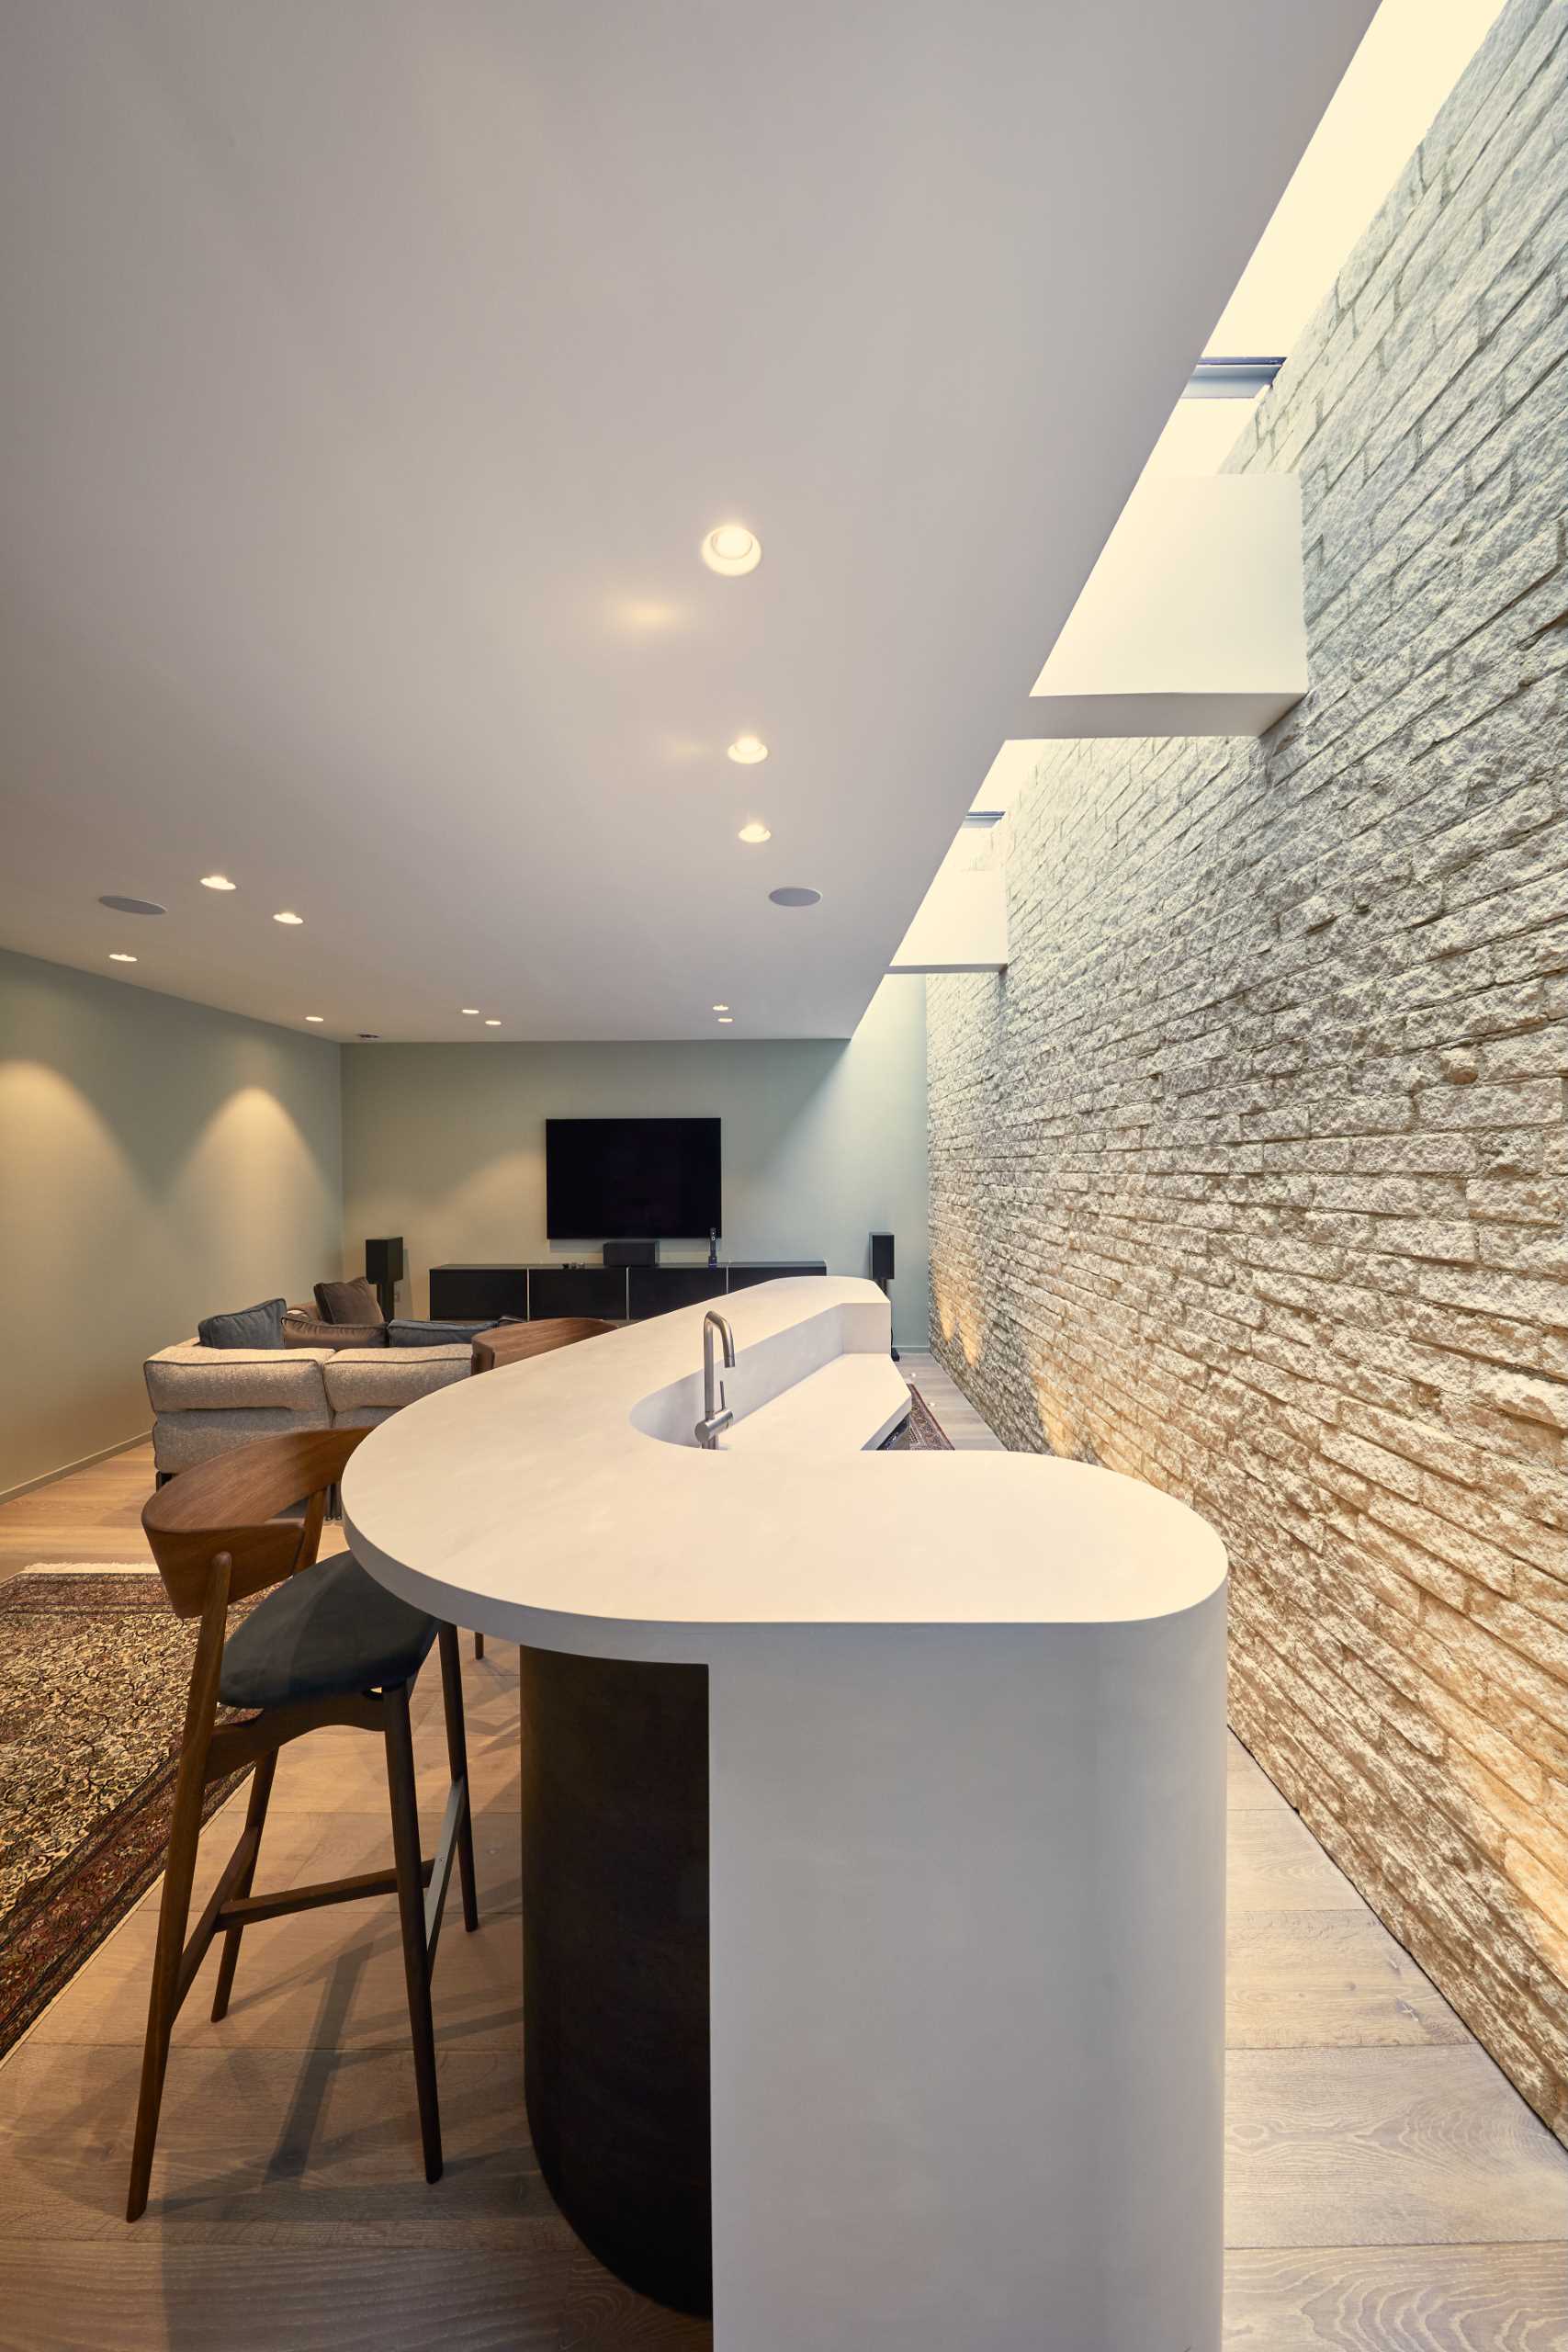 A modern home with a stone wall and a curved bar.